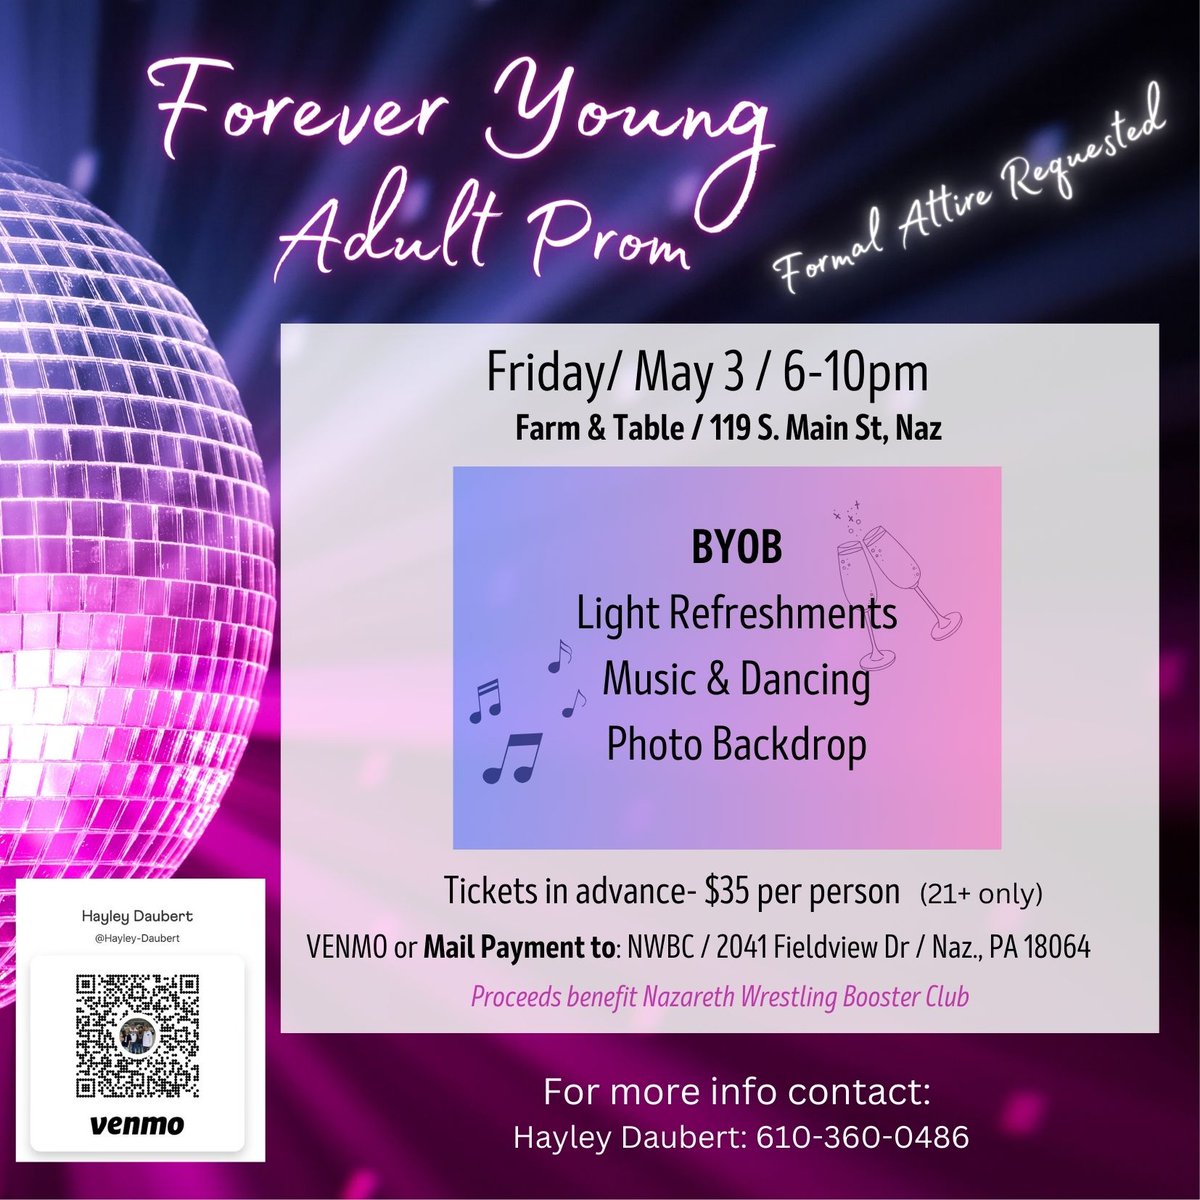 Over 85 Prom attendees already! Register TODAY for the first ever Forever Young Adult Prom on Friday, May 3rd! It will be a great night of laughs, dancing, & fun! It is BYOB! #GoBlueEagles #GoLadyBlueEagles #NazarethProud 🔵🦅🤼‍♀️🤼‍♂️